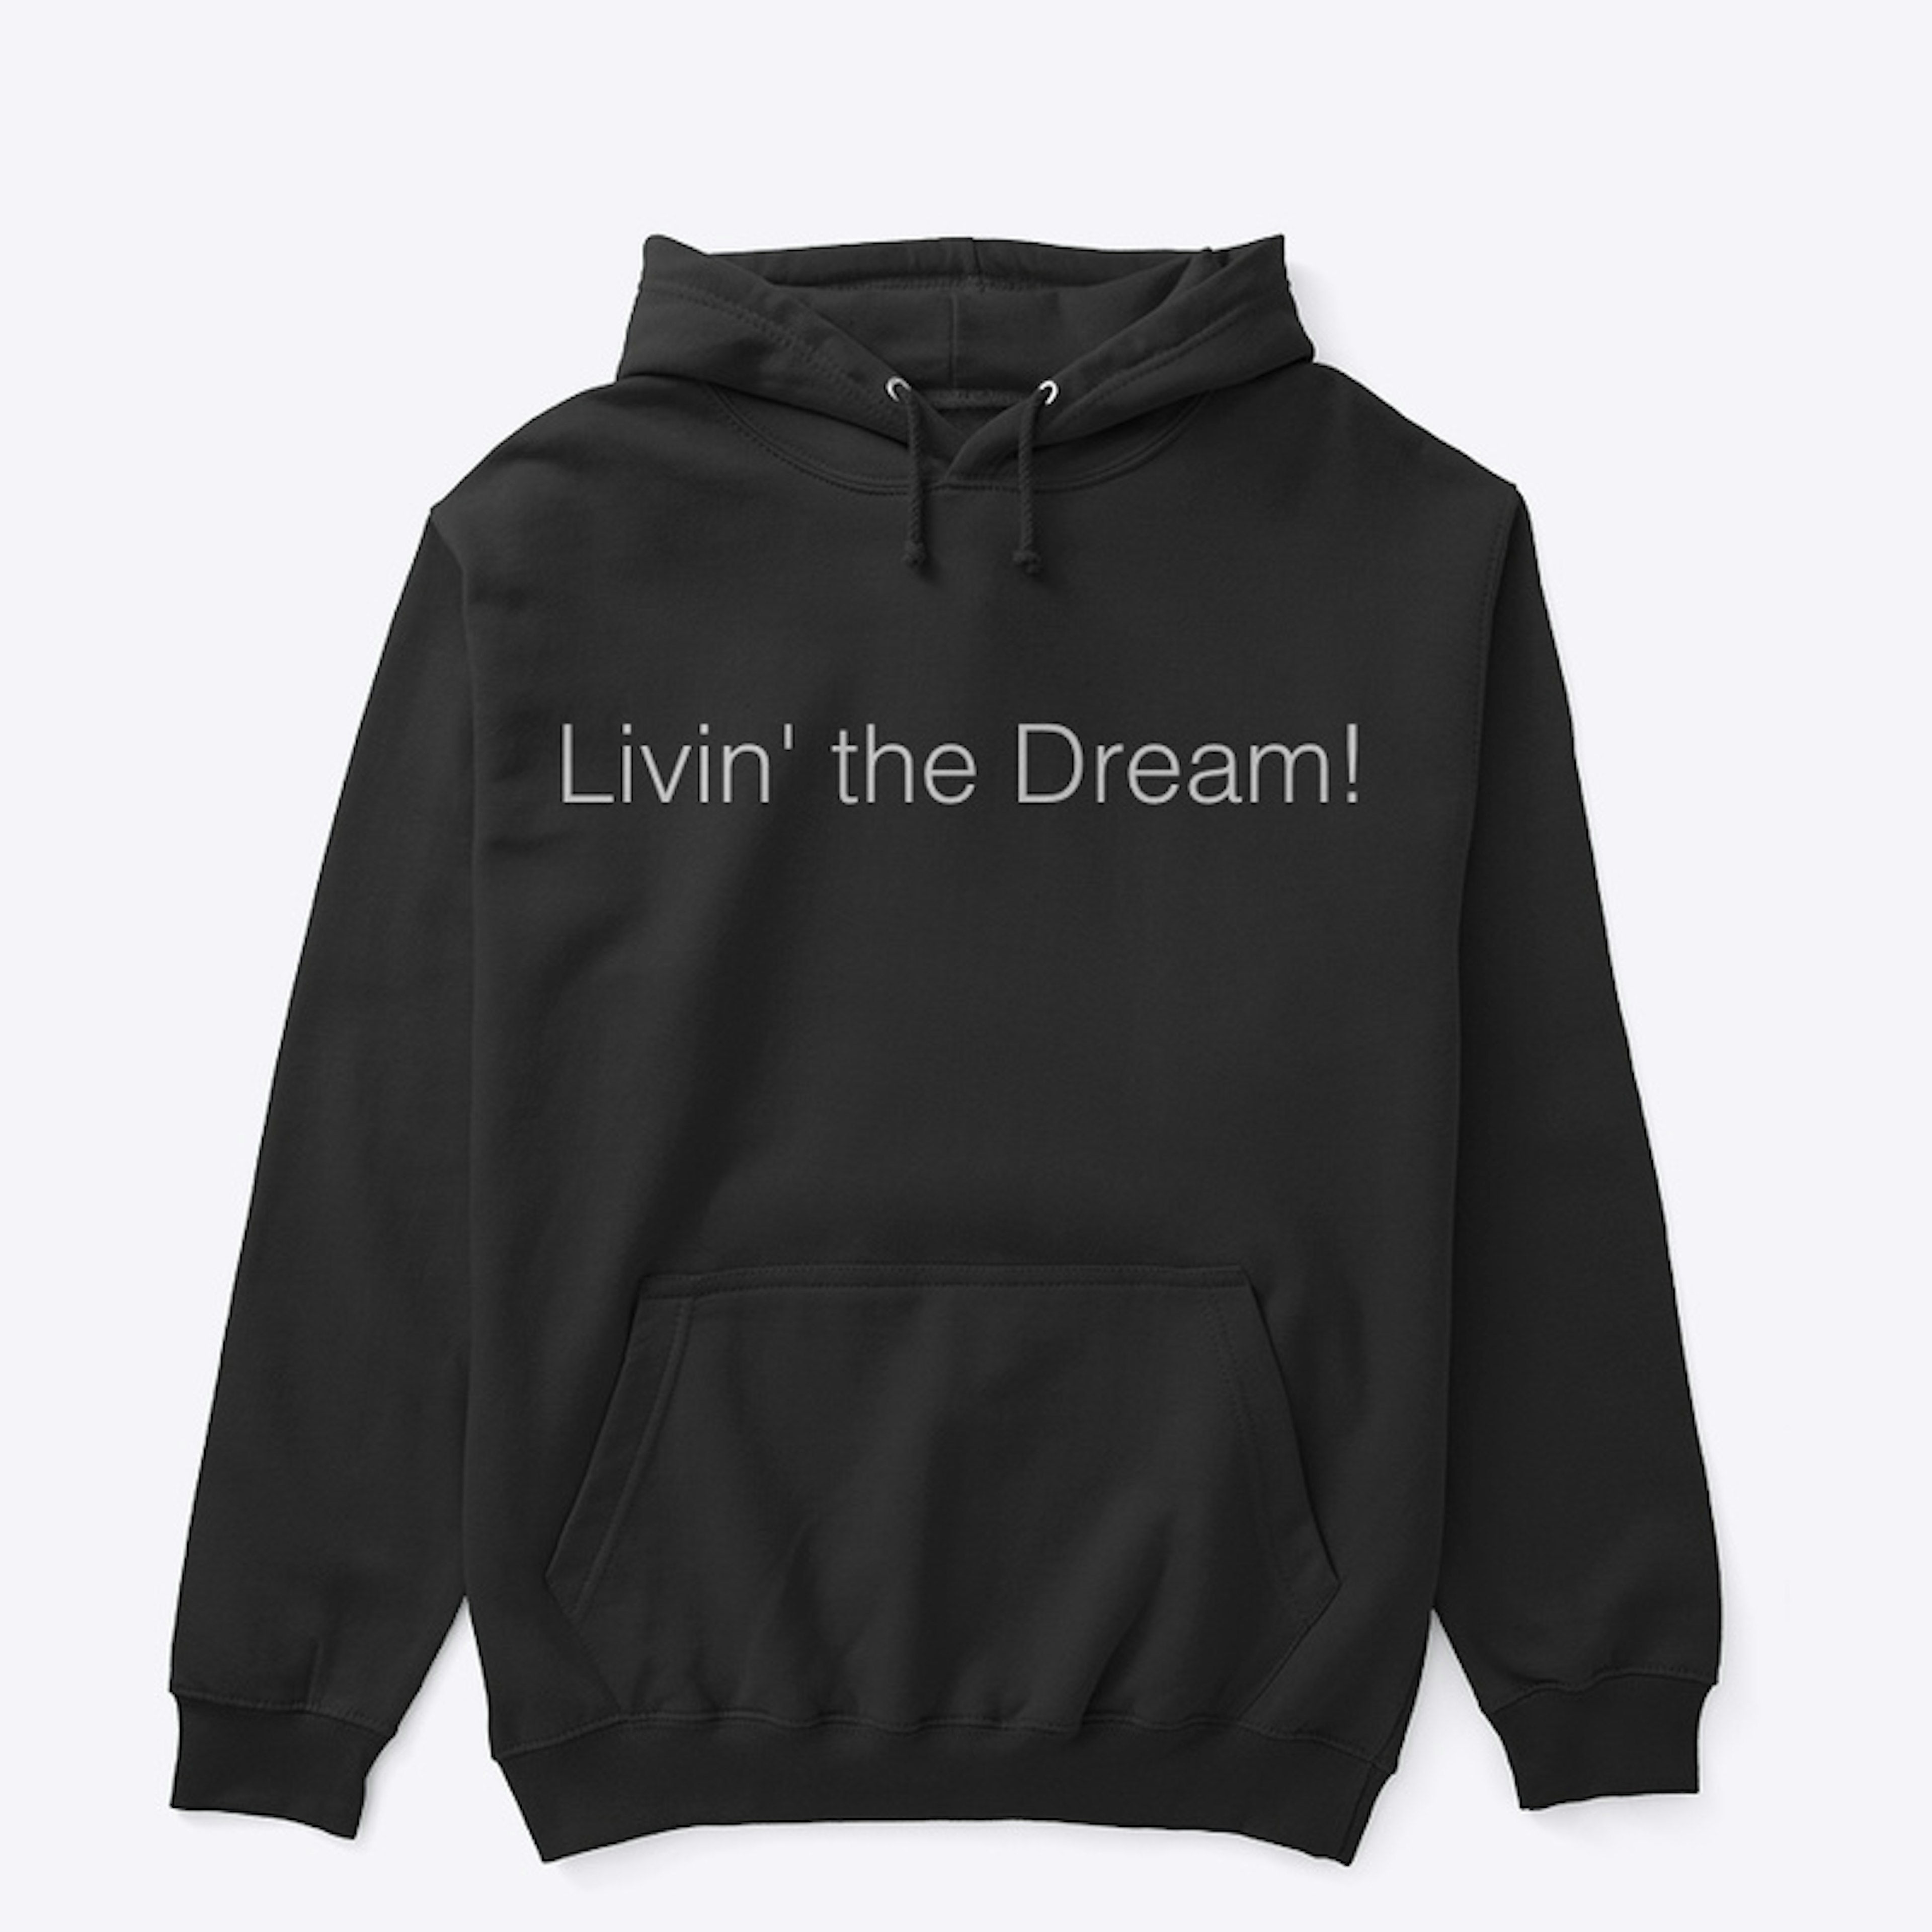 Livin' the Dream Collection